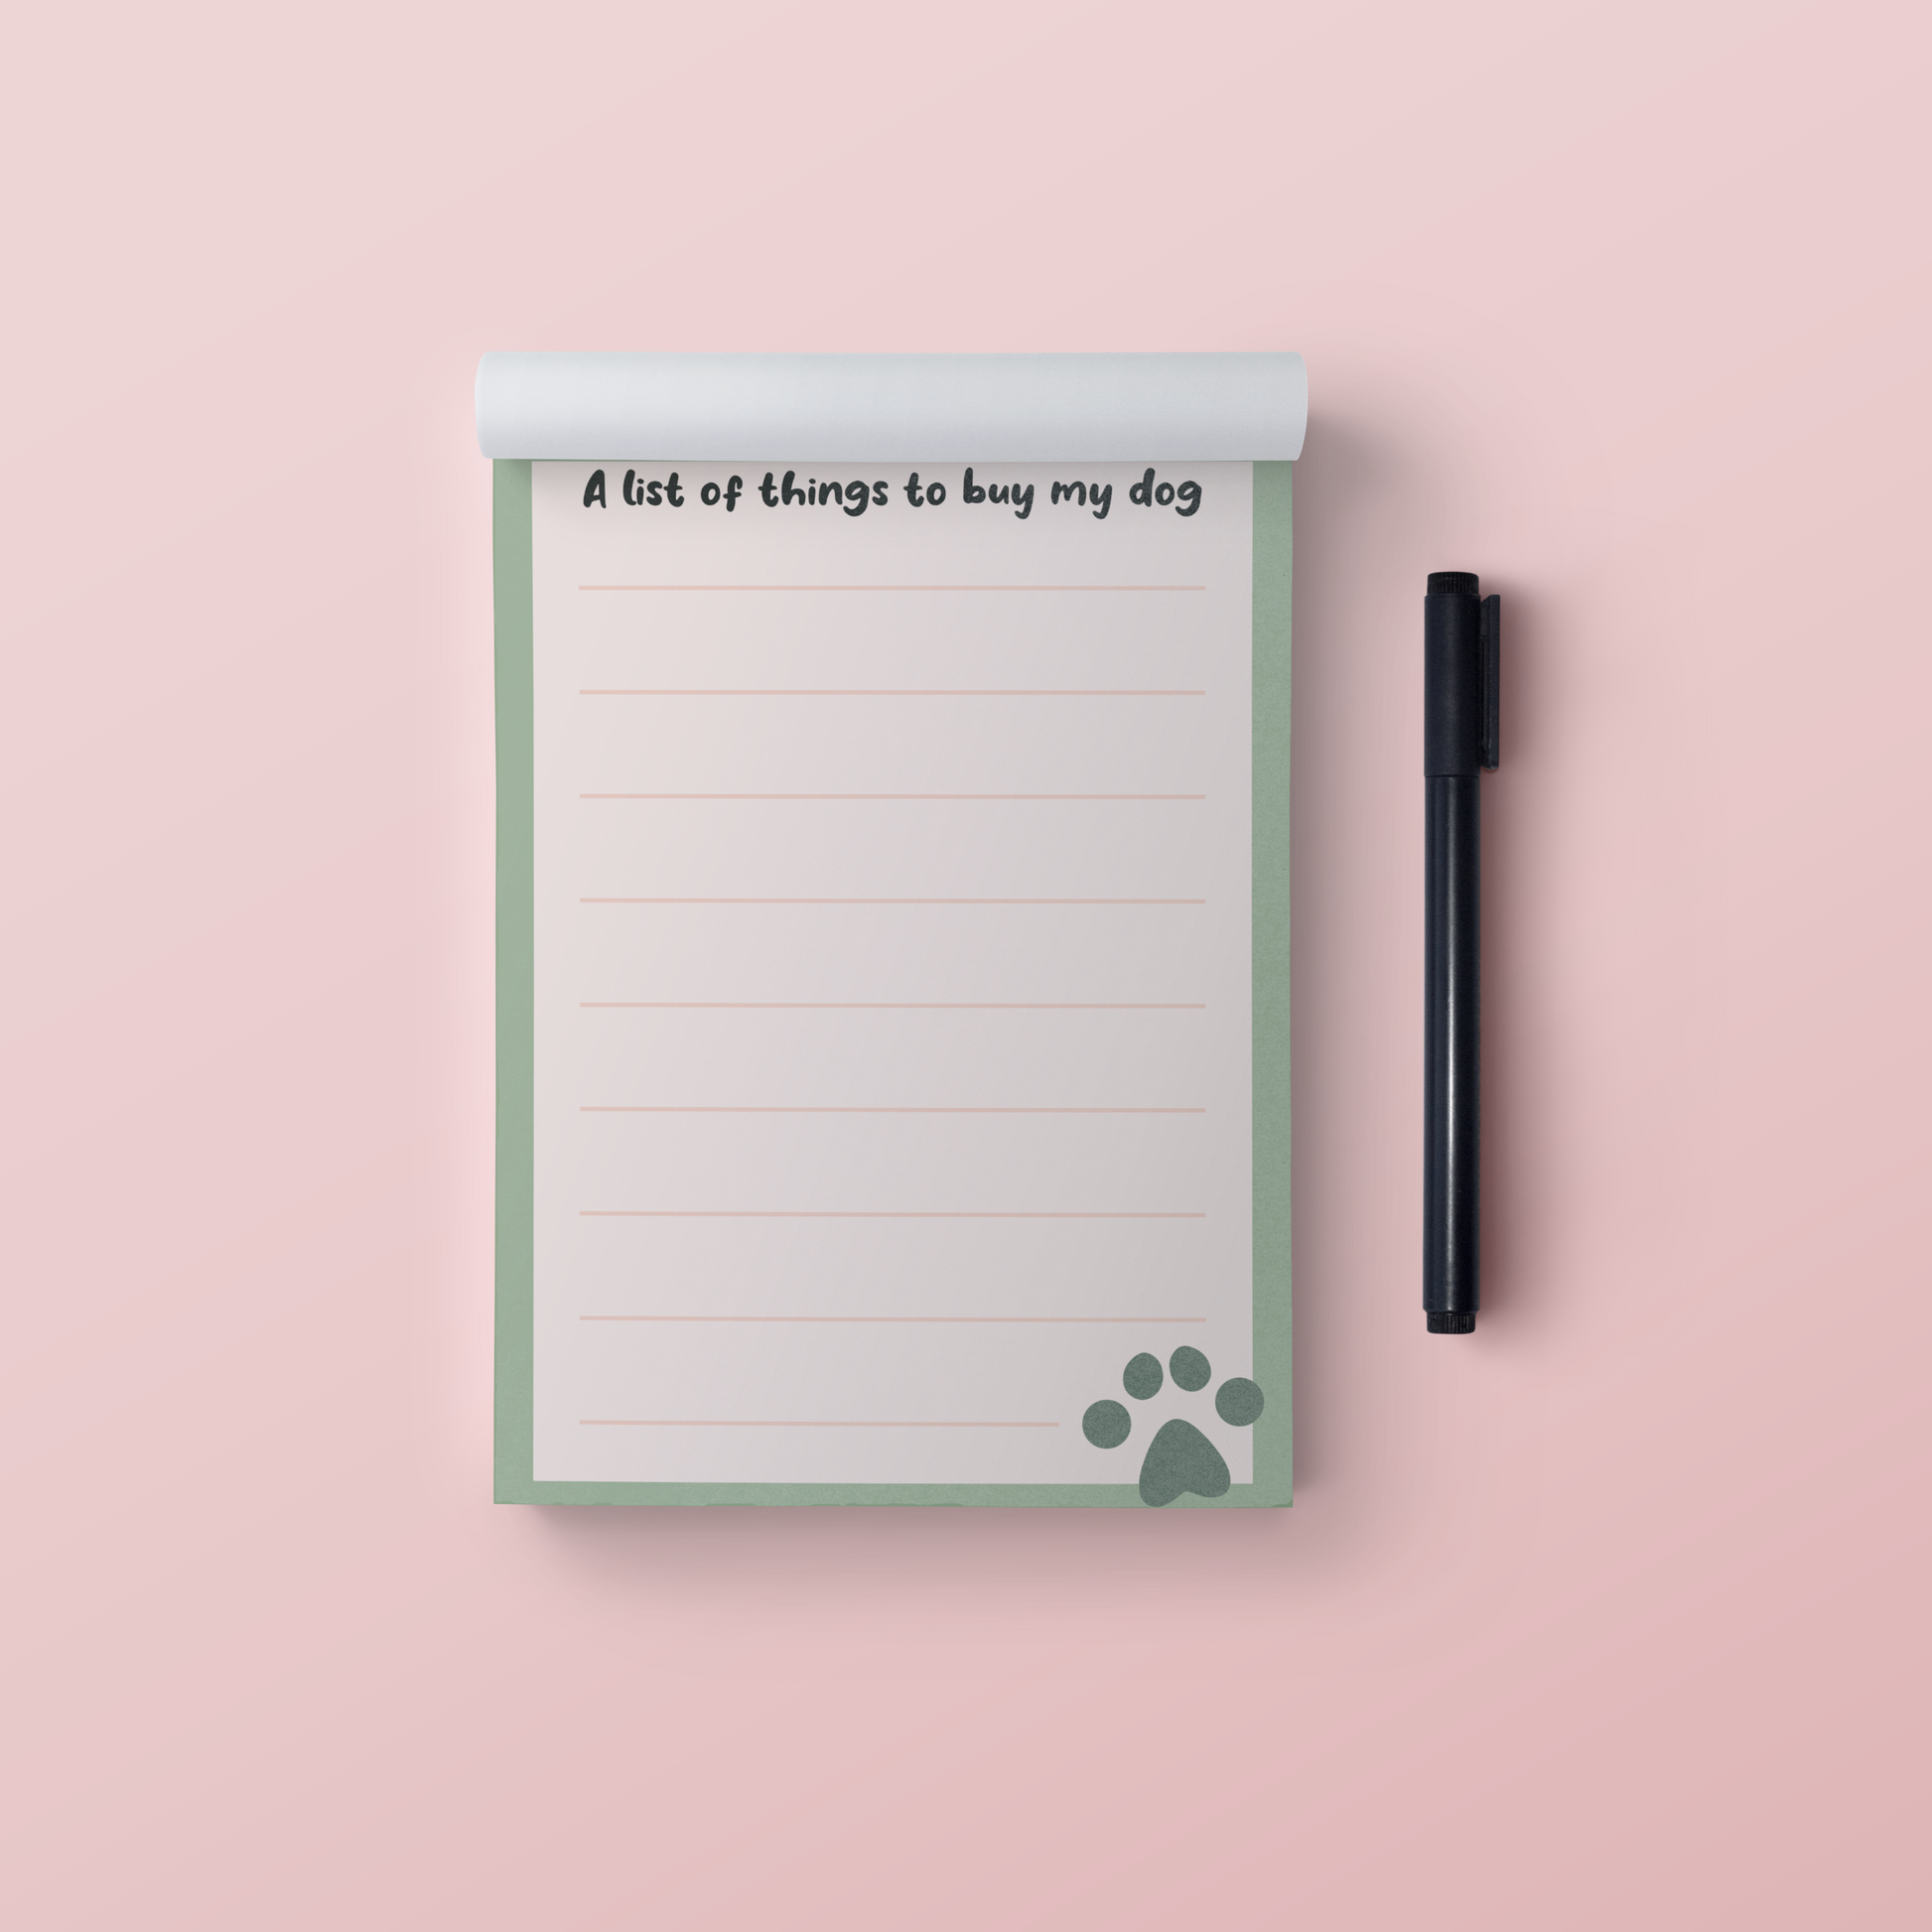 A picture of a green and cream notepad that says A list of things to buy my dog at the top with a green paw print in the bottom right hand corner. Pictured on a pink background with a black pen next to it.